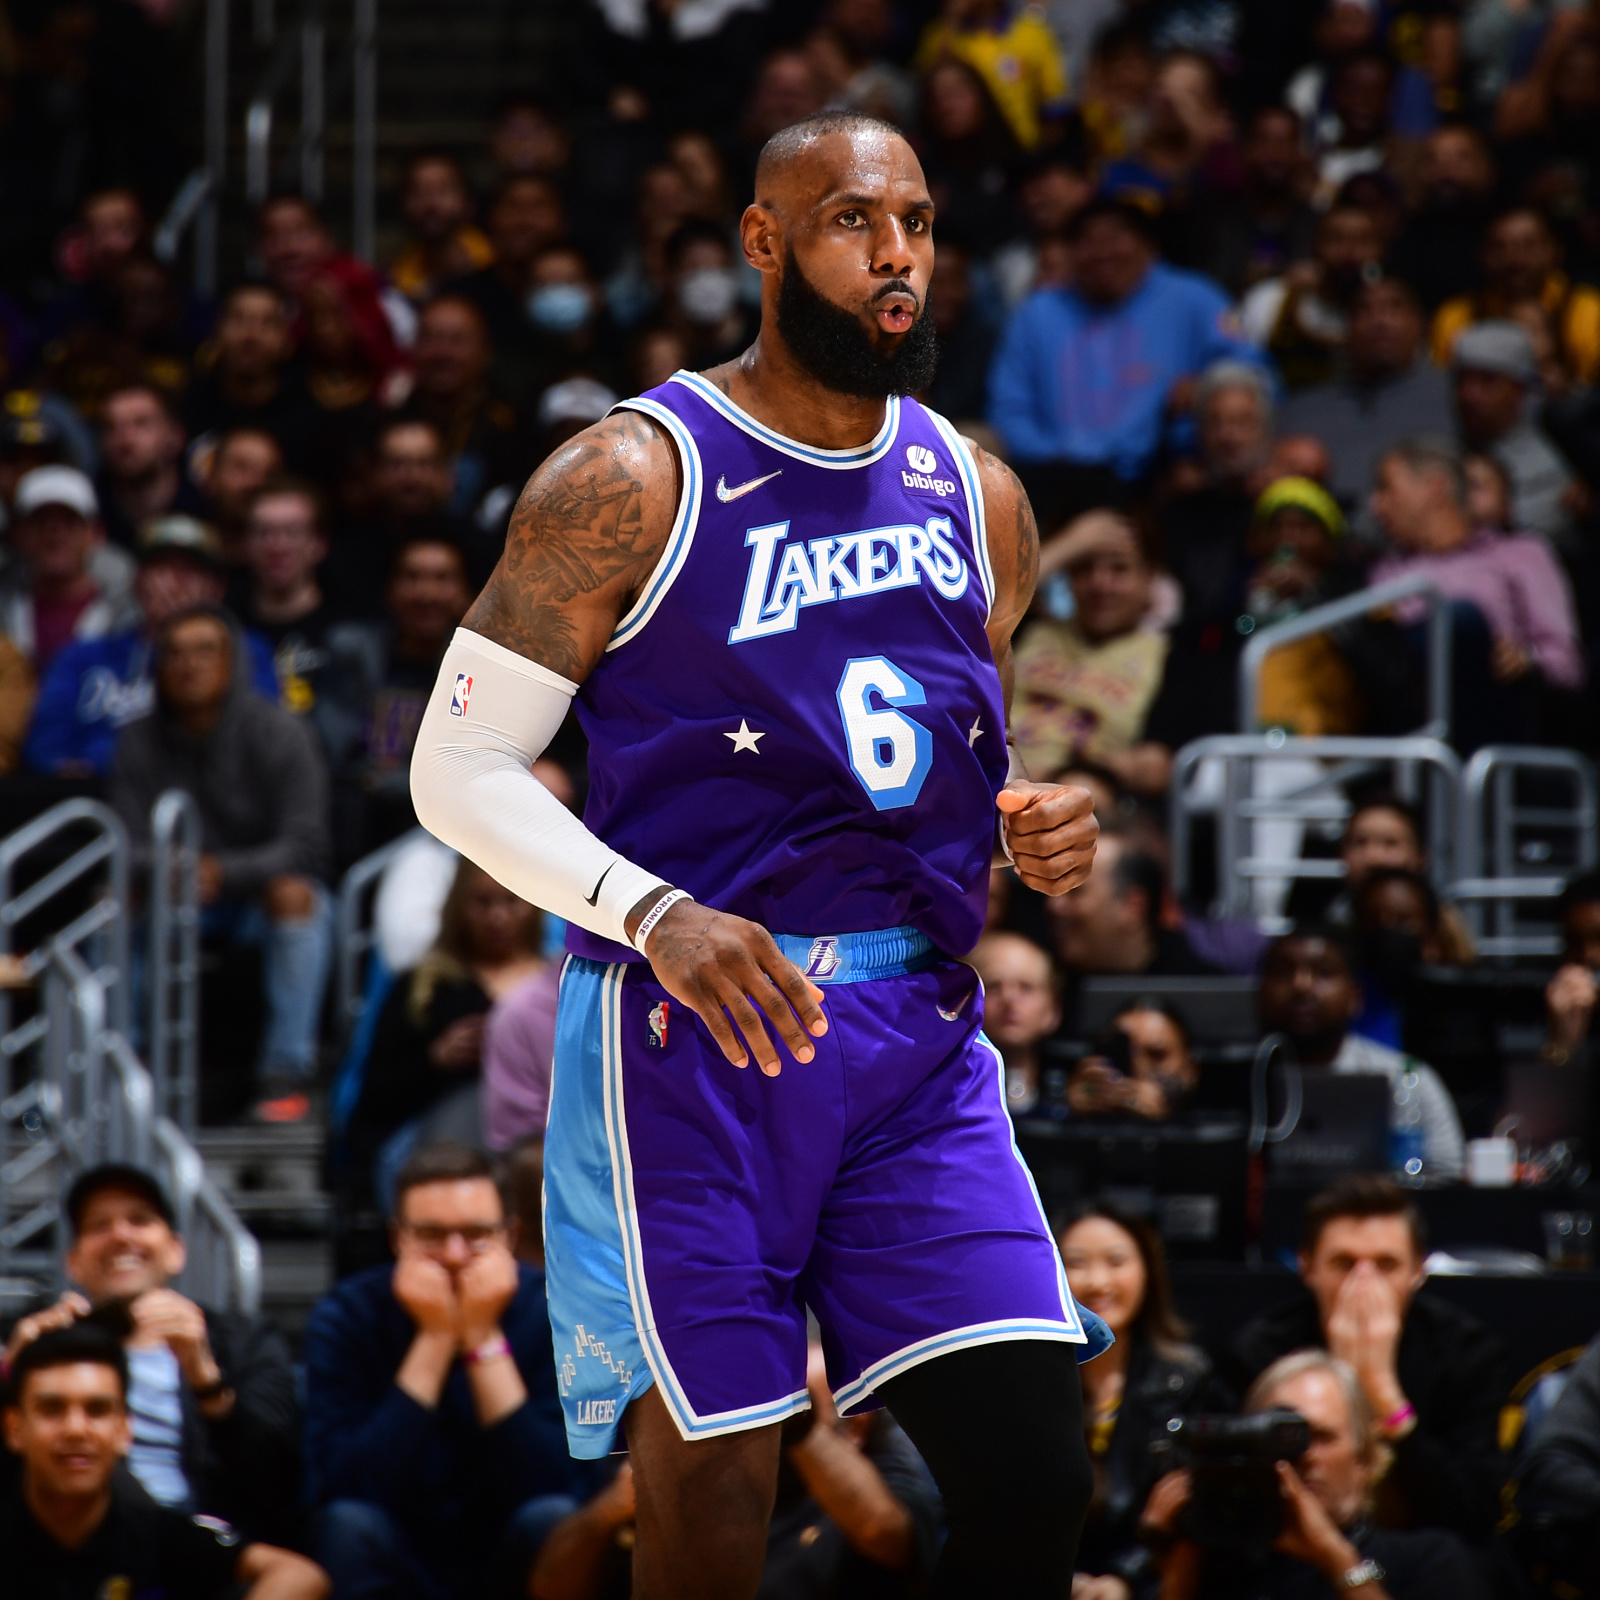 Lakers' LeBron James Tops Harden, Curry for Best-Selling Jersey in